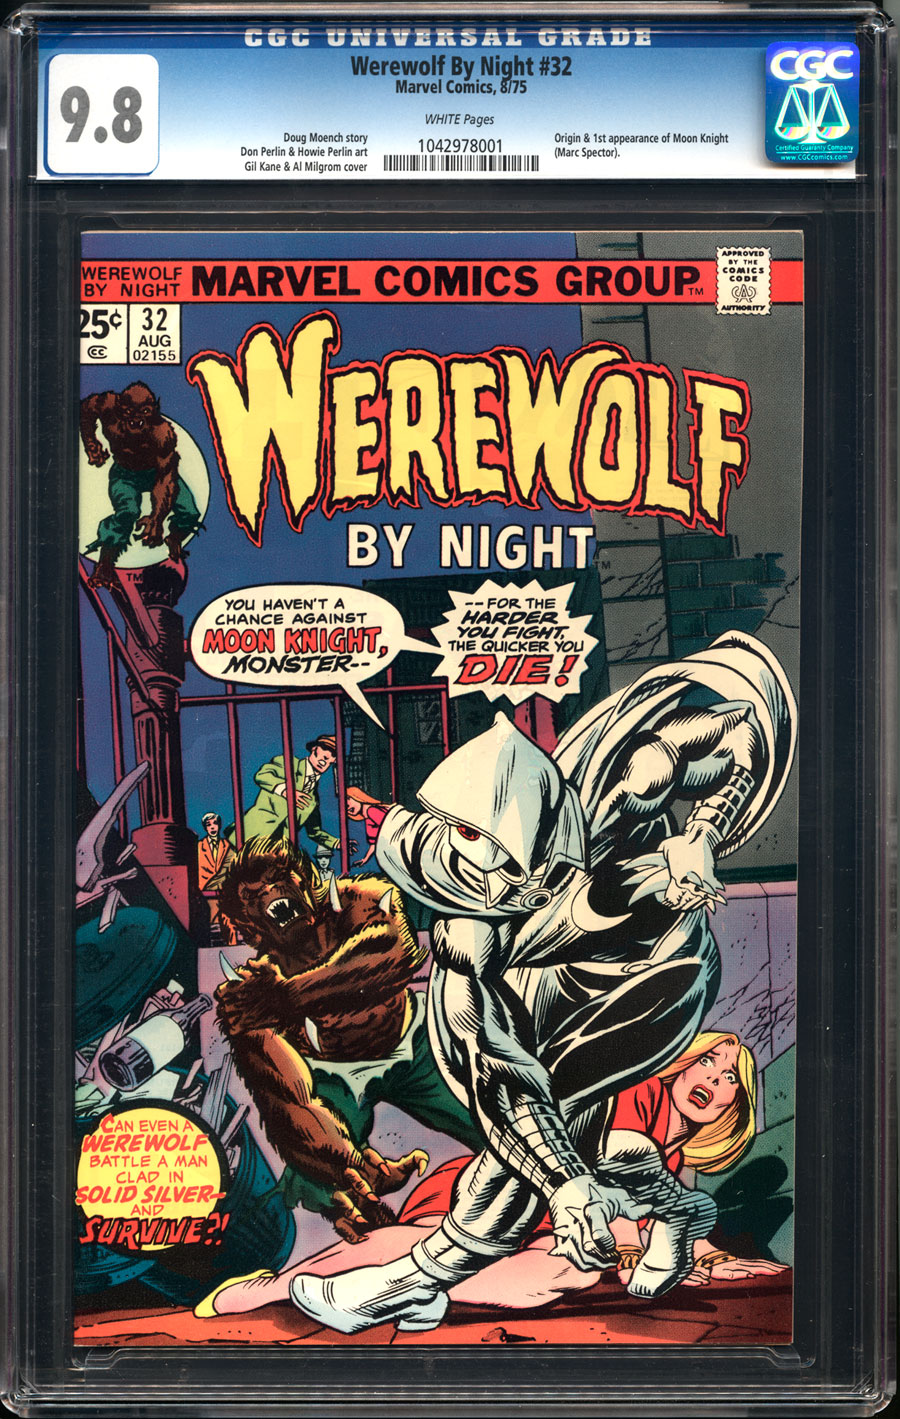 Marvel Comics Werewolf by Night #32 1st appearance of Moon Knight cover  print 11 by 17, 8.5 by 11 or 15 by 24 (not the actual comic book)